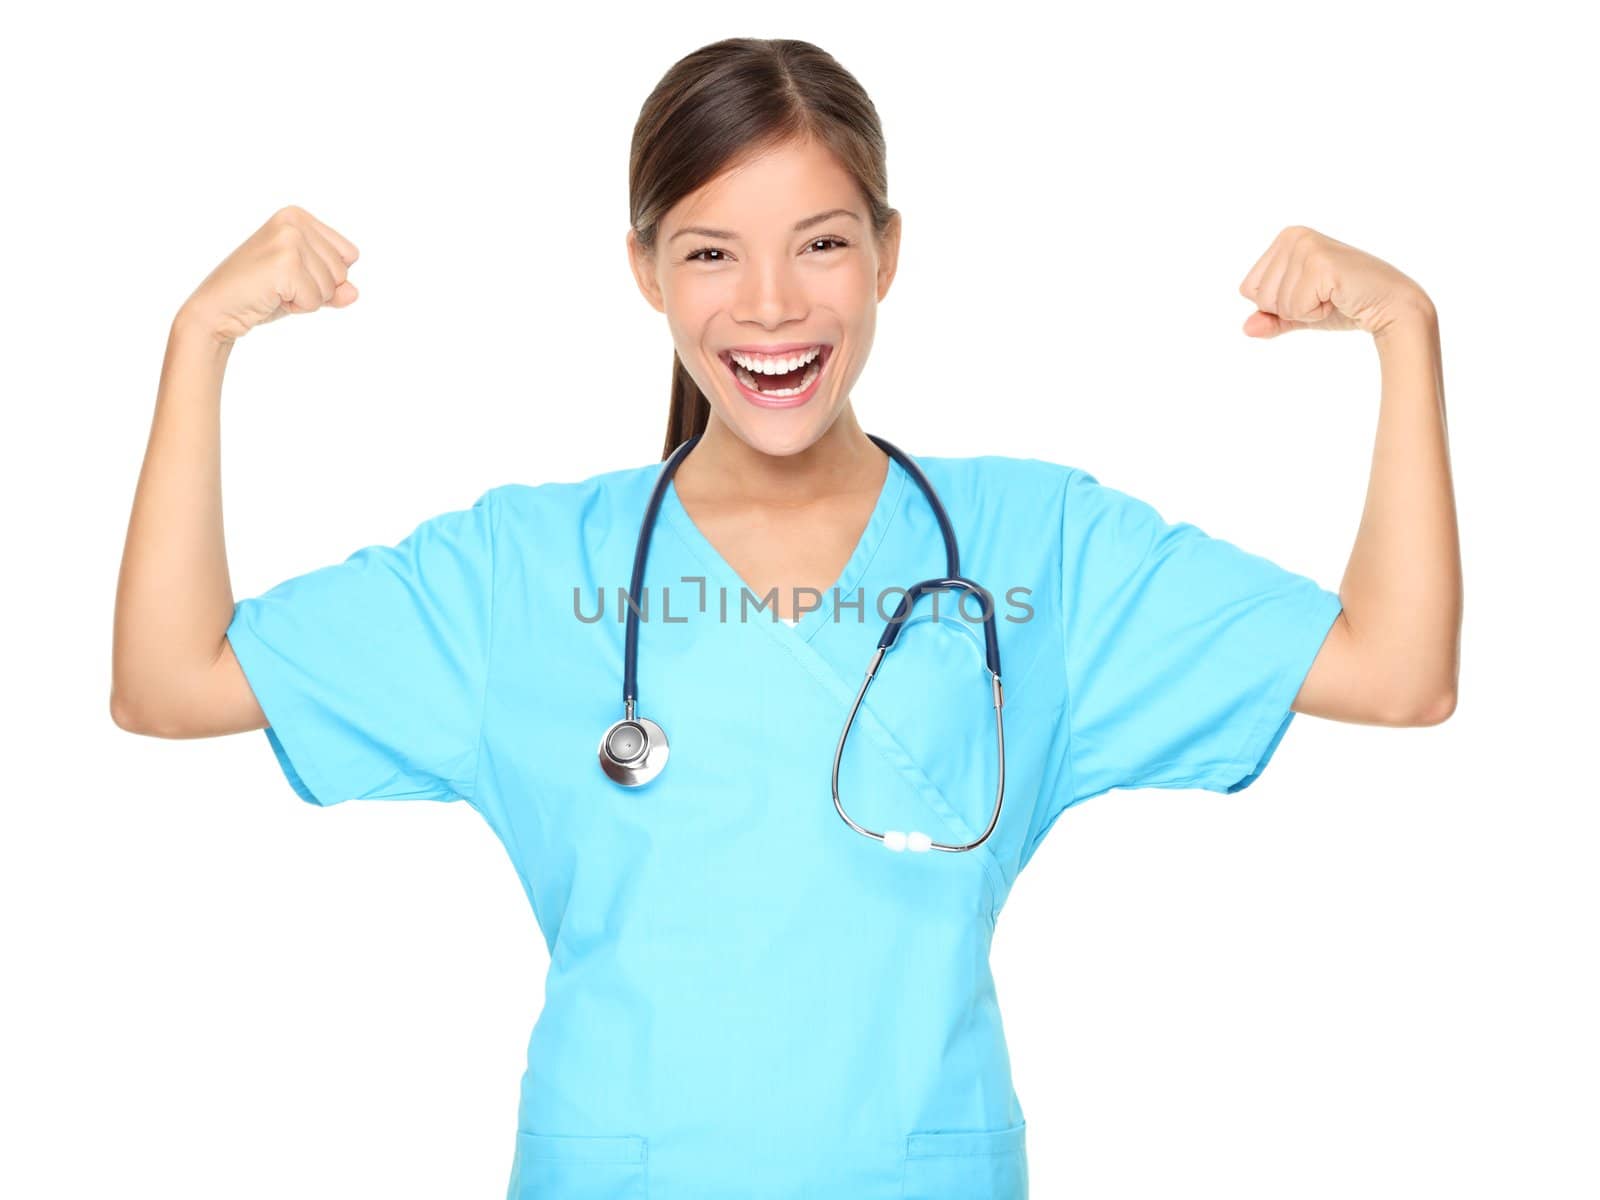 Nurse woman showing arm muscles smiling. Funny photo of successful young female nurse in blue scrub. Asian Caucasian woman isolated on white background.